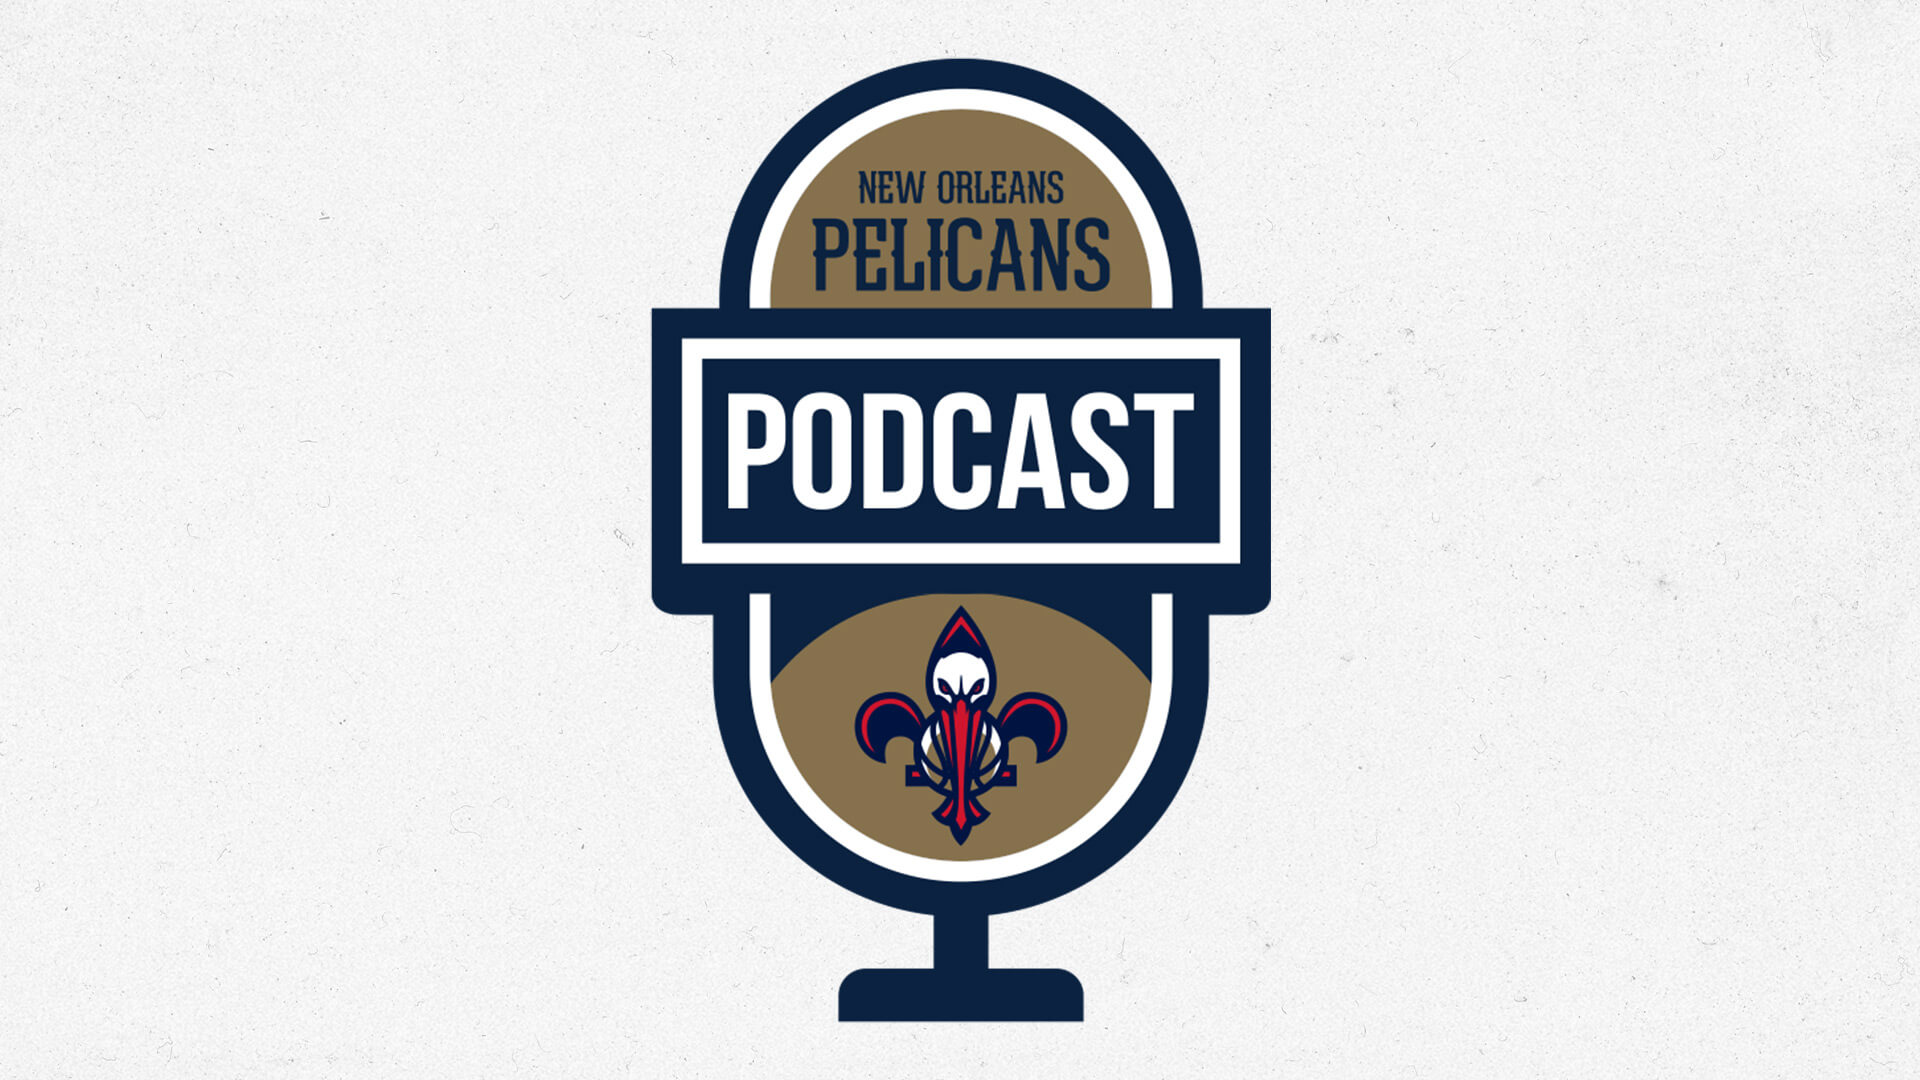 Will Guillory previews New Orleans Pelicans vs. Miami Heat | Pelicans Podcast